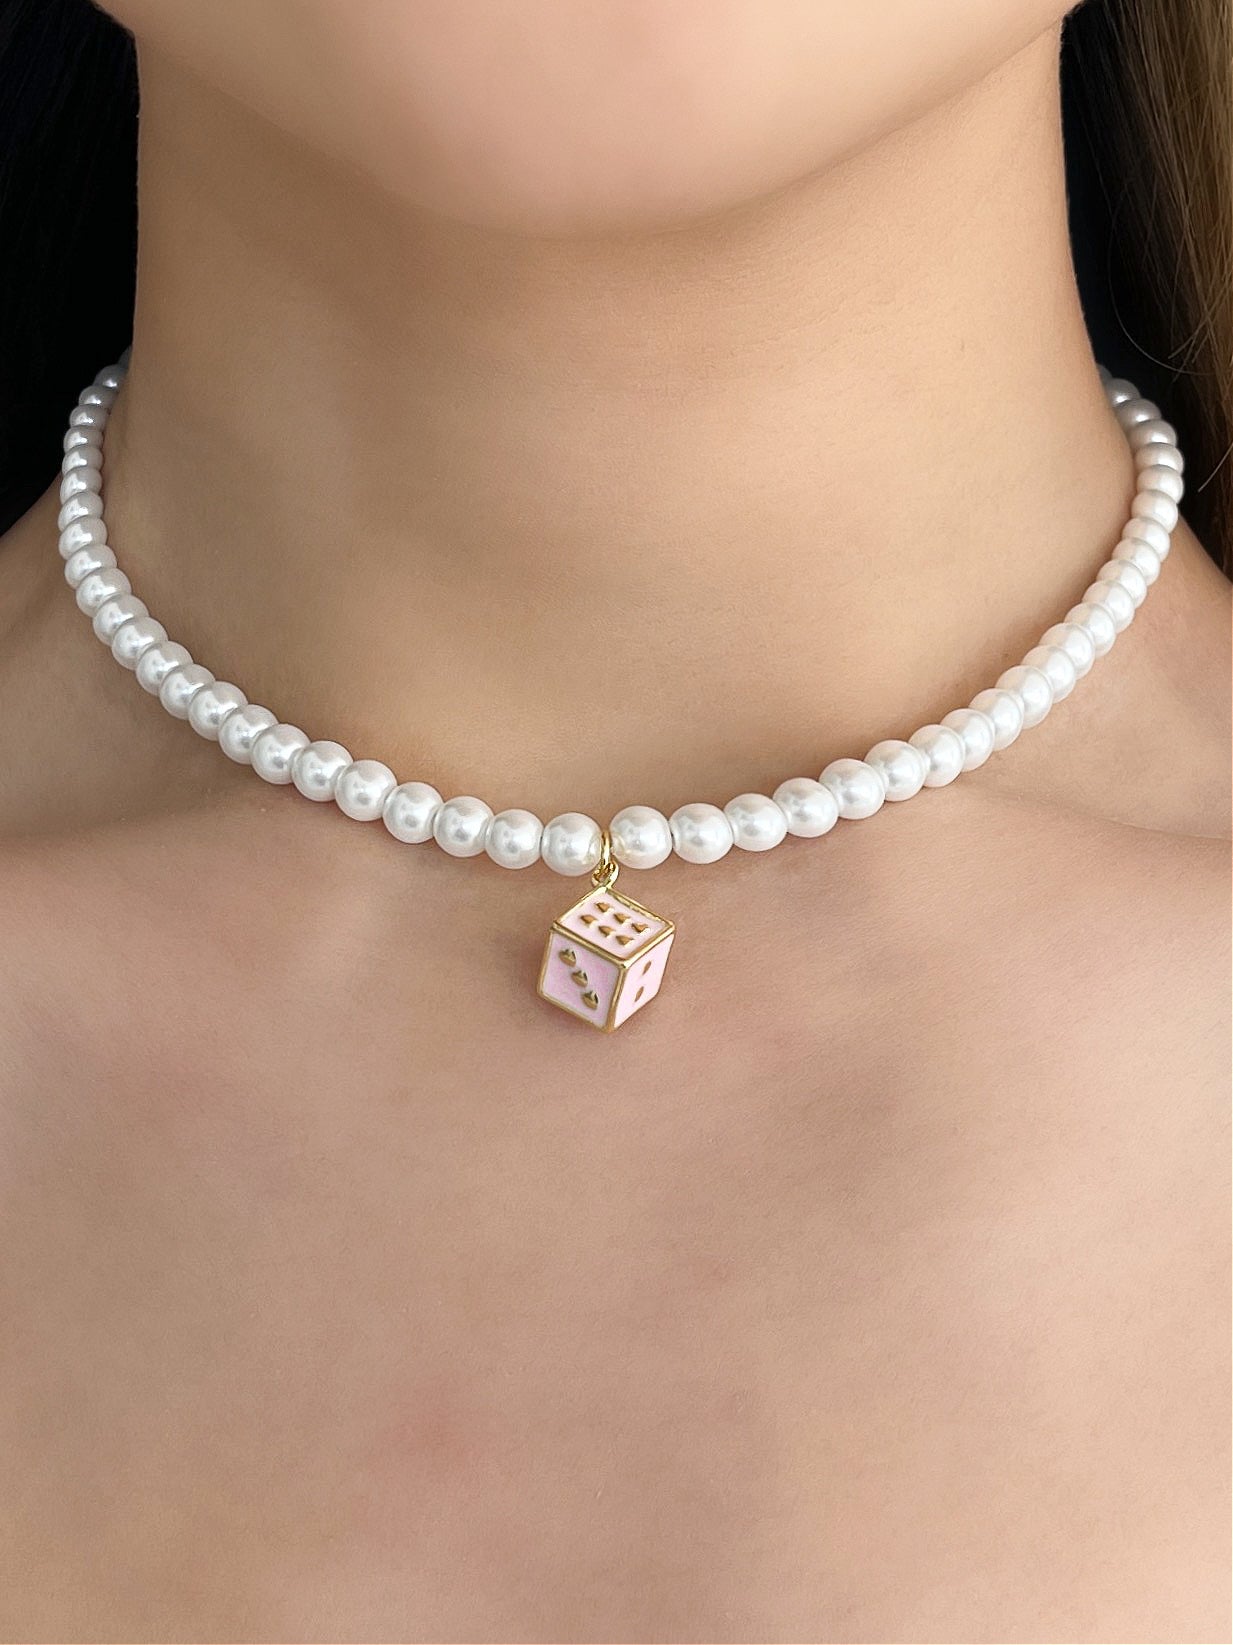 LOVER'S LUCK PEARL NECKLACE